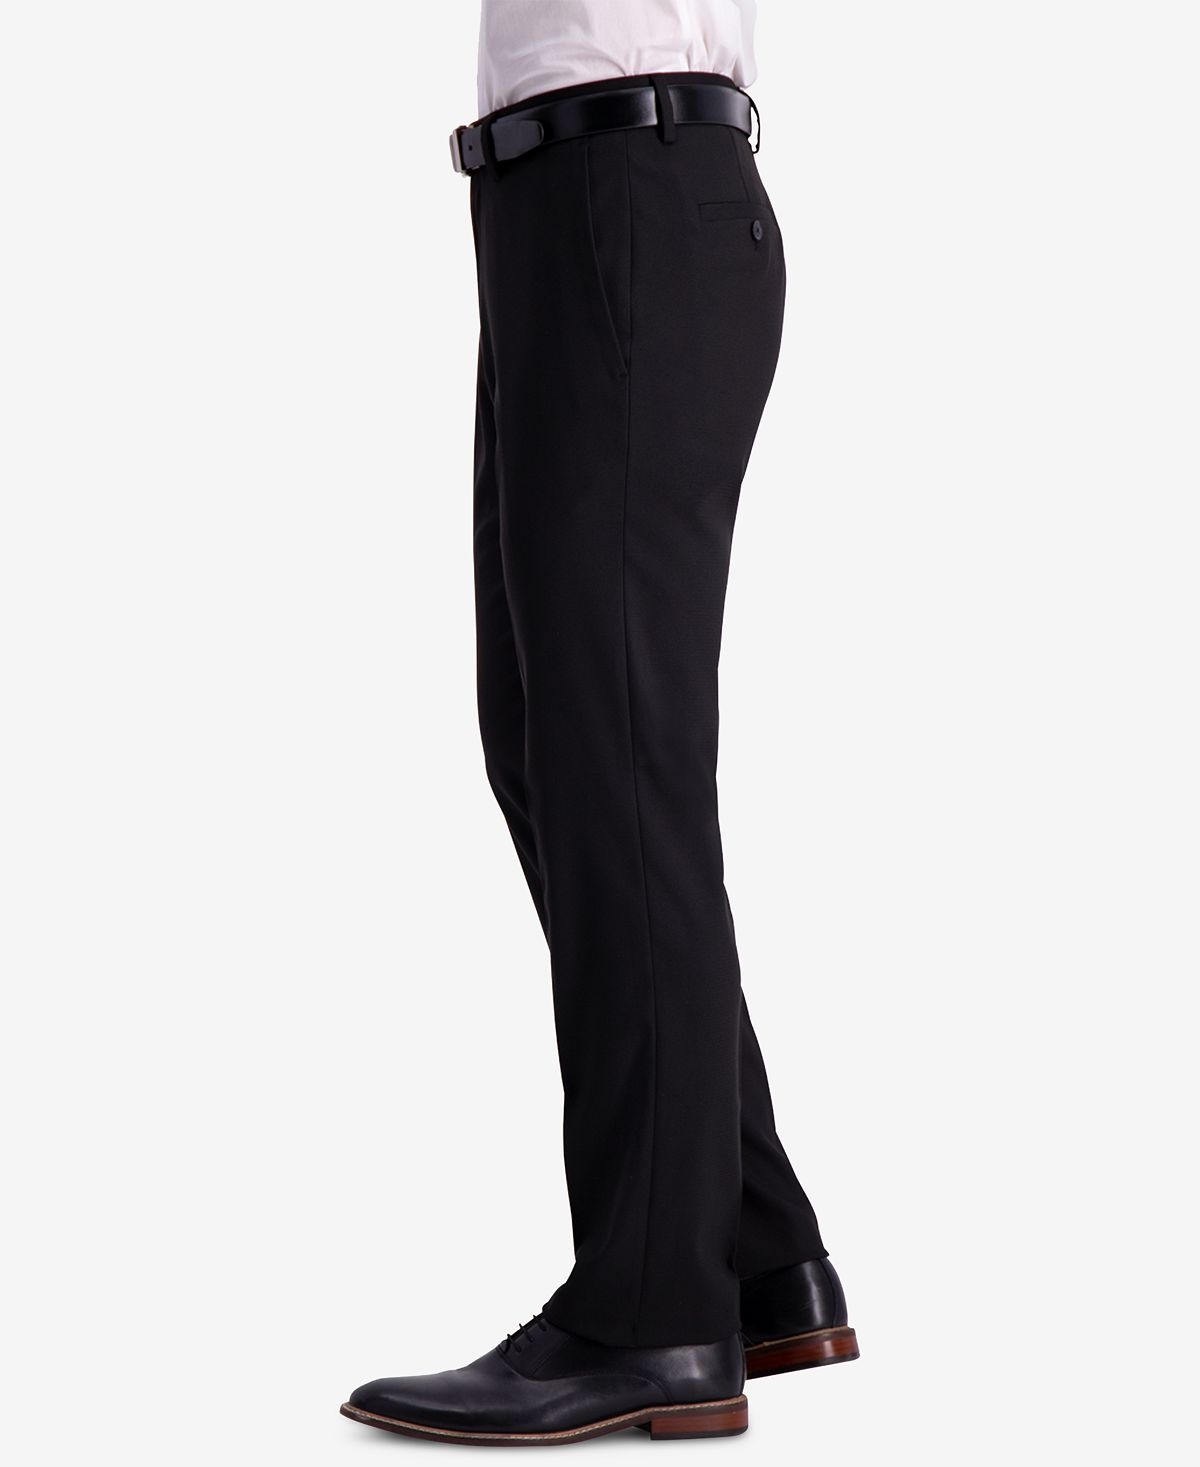 Kenneth Cole Reaction Slim-fit Shadow Check Dress Pants Black